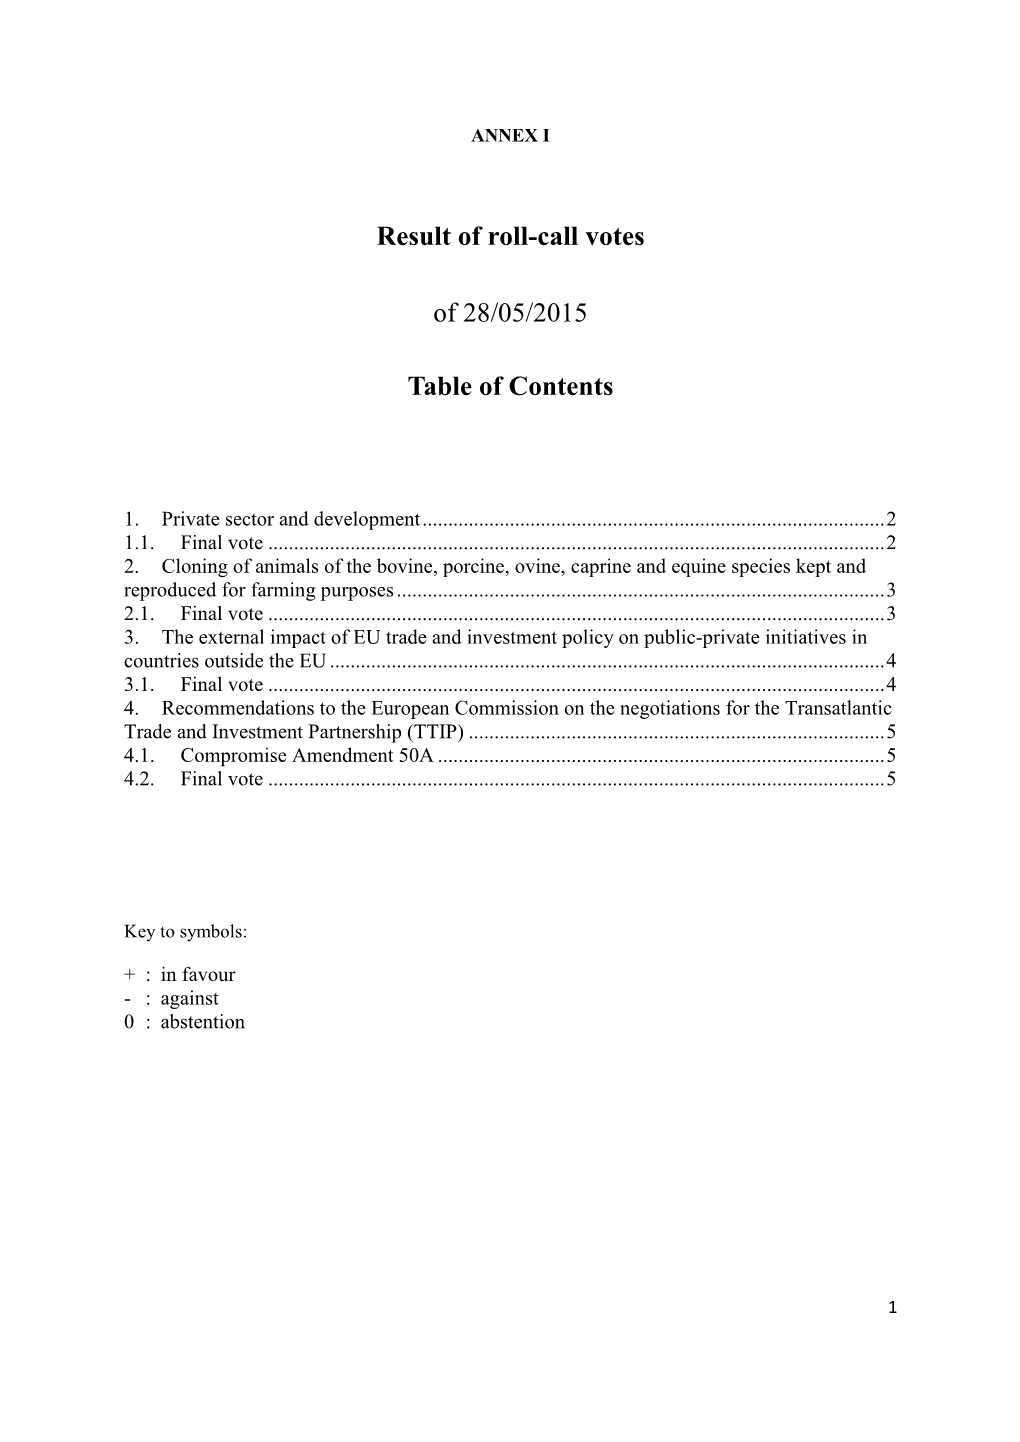 Result of Roll-Call Votes of 28/05/2015 Table of Contents